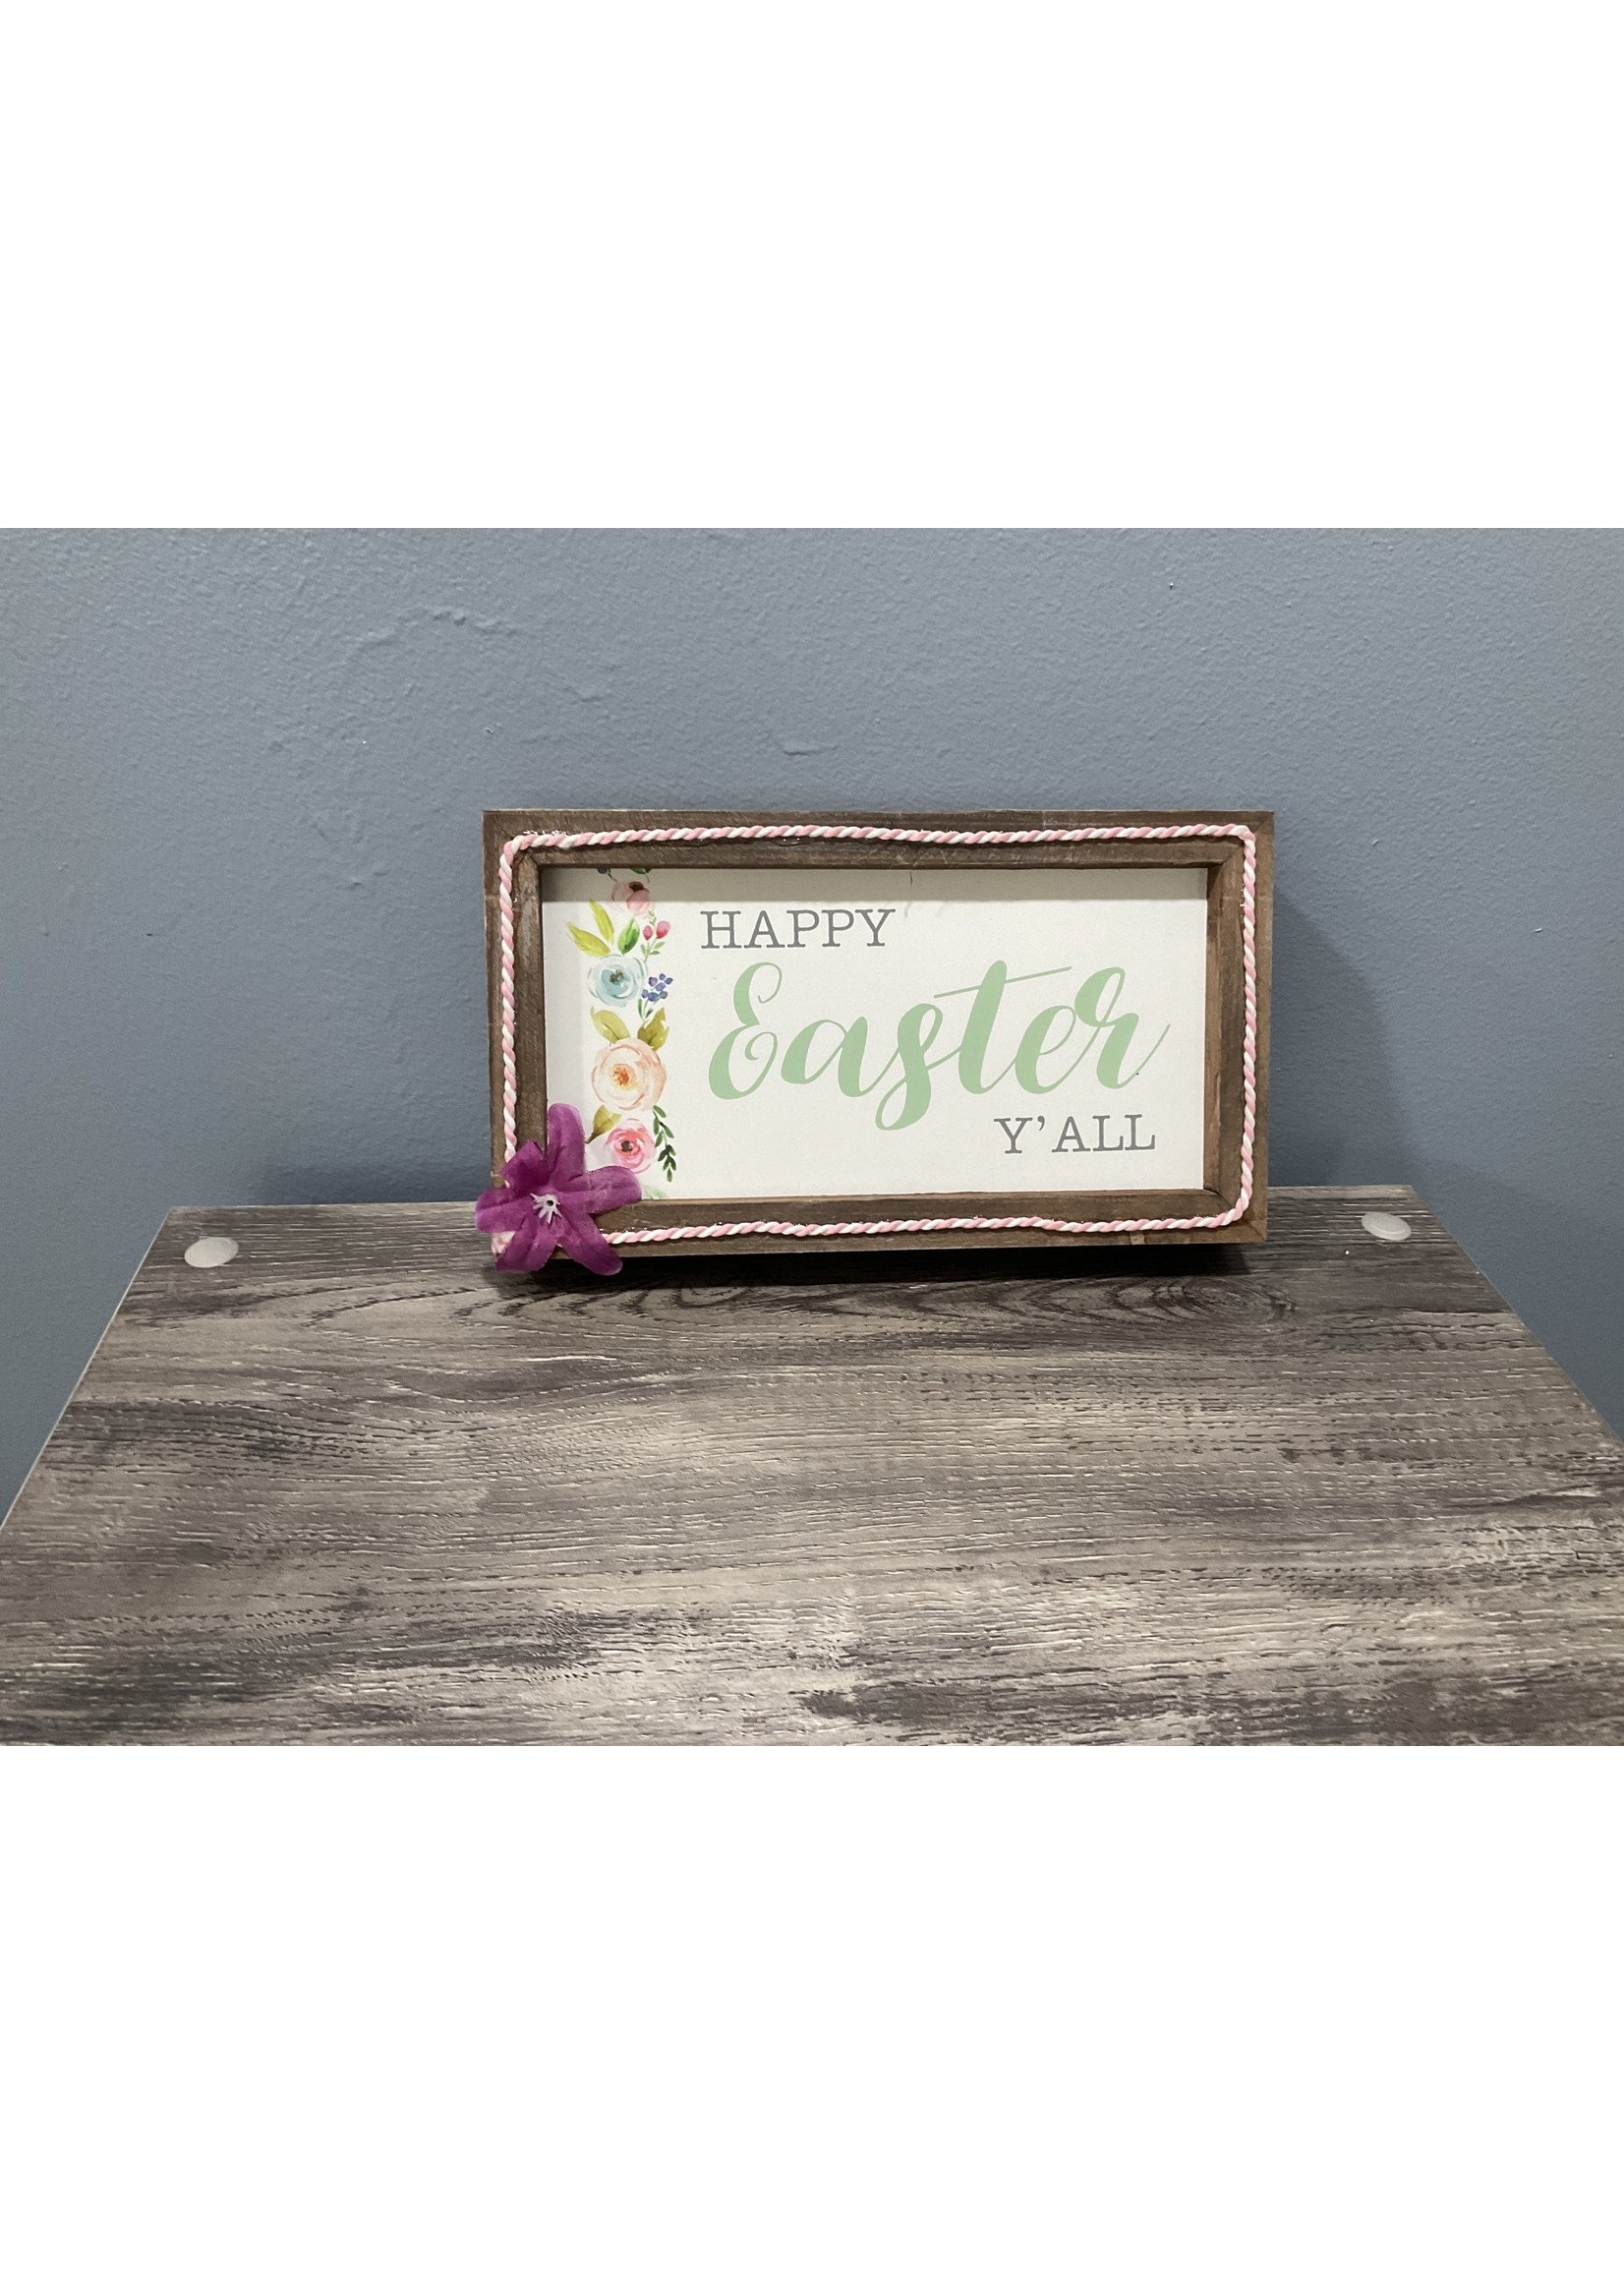 My New Favorite Thing 461 Sign 9x5-"Happy Easter Y'All" w/Pink Trim and Purple Flower